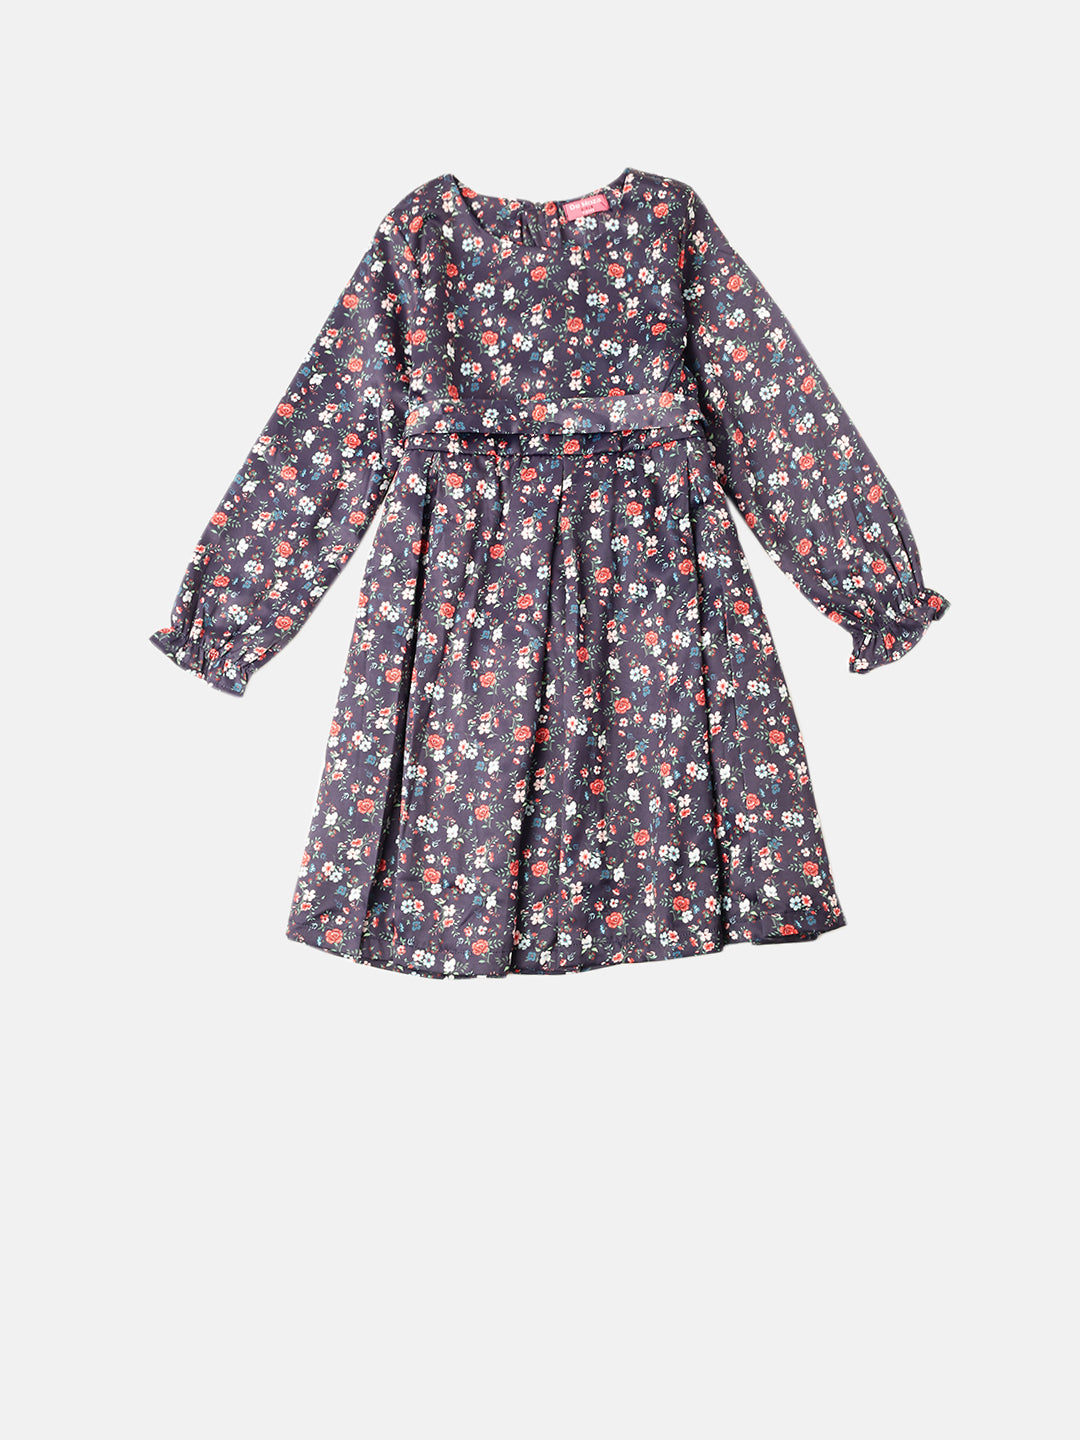 PIPIN Girls Solid Dress Navy Blue